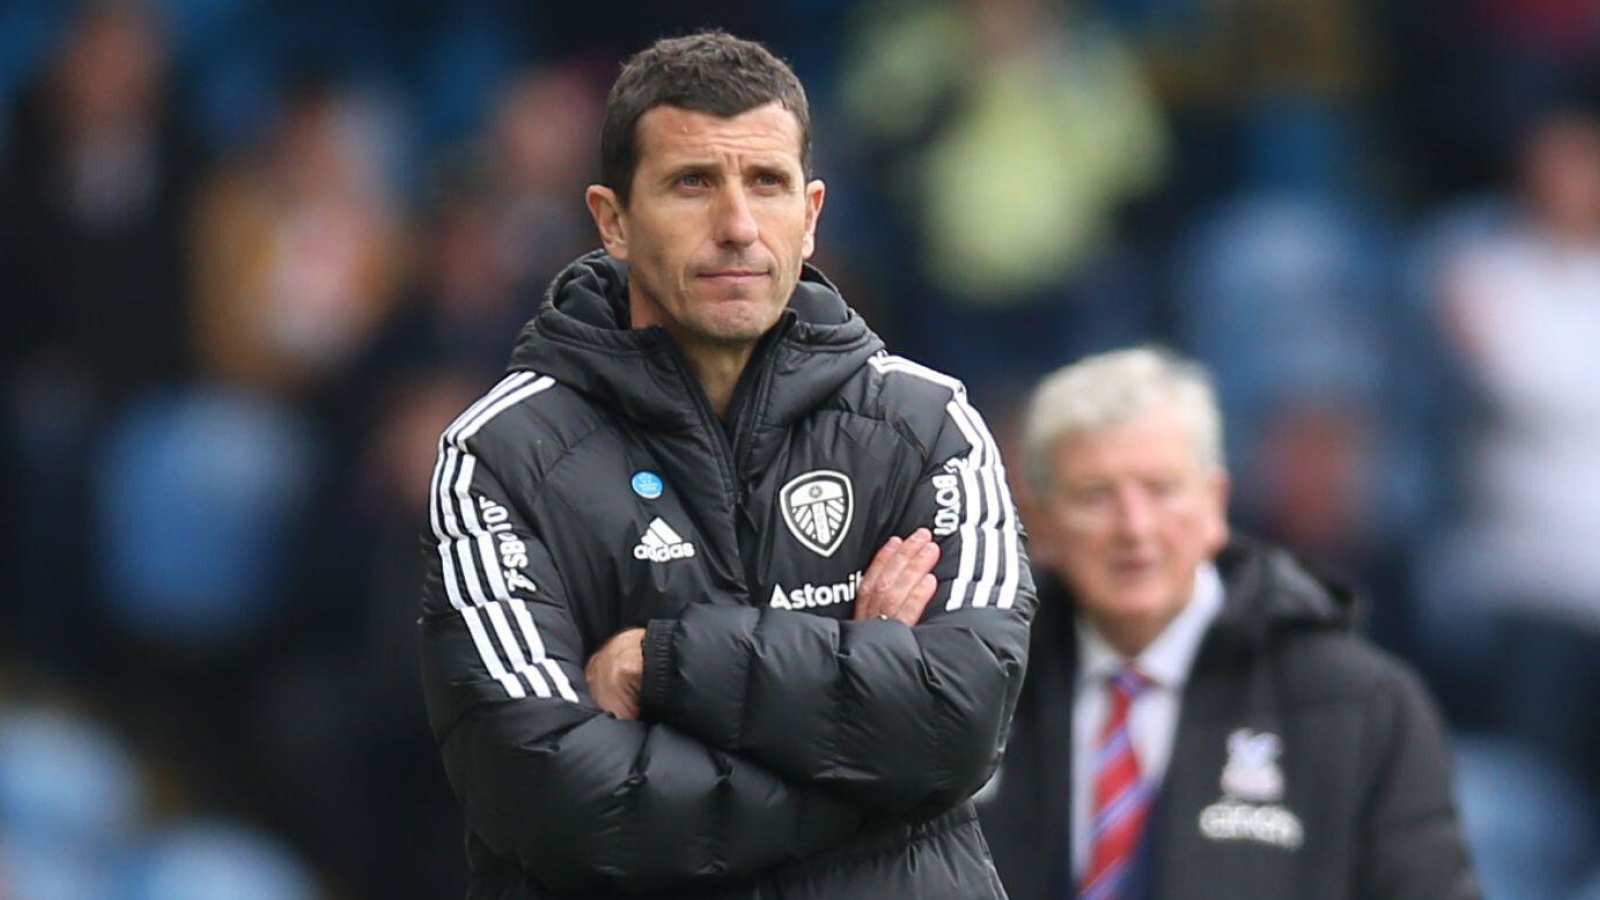 Leeds title Javi Gracia as manager on ‘functional’